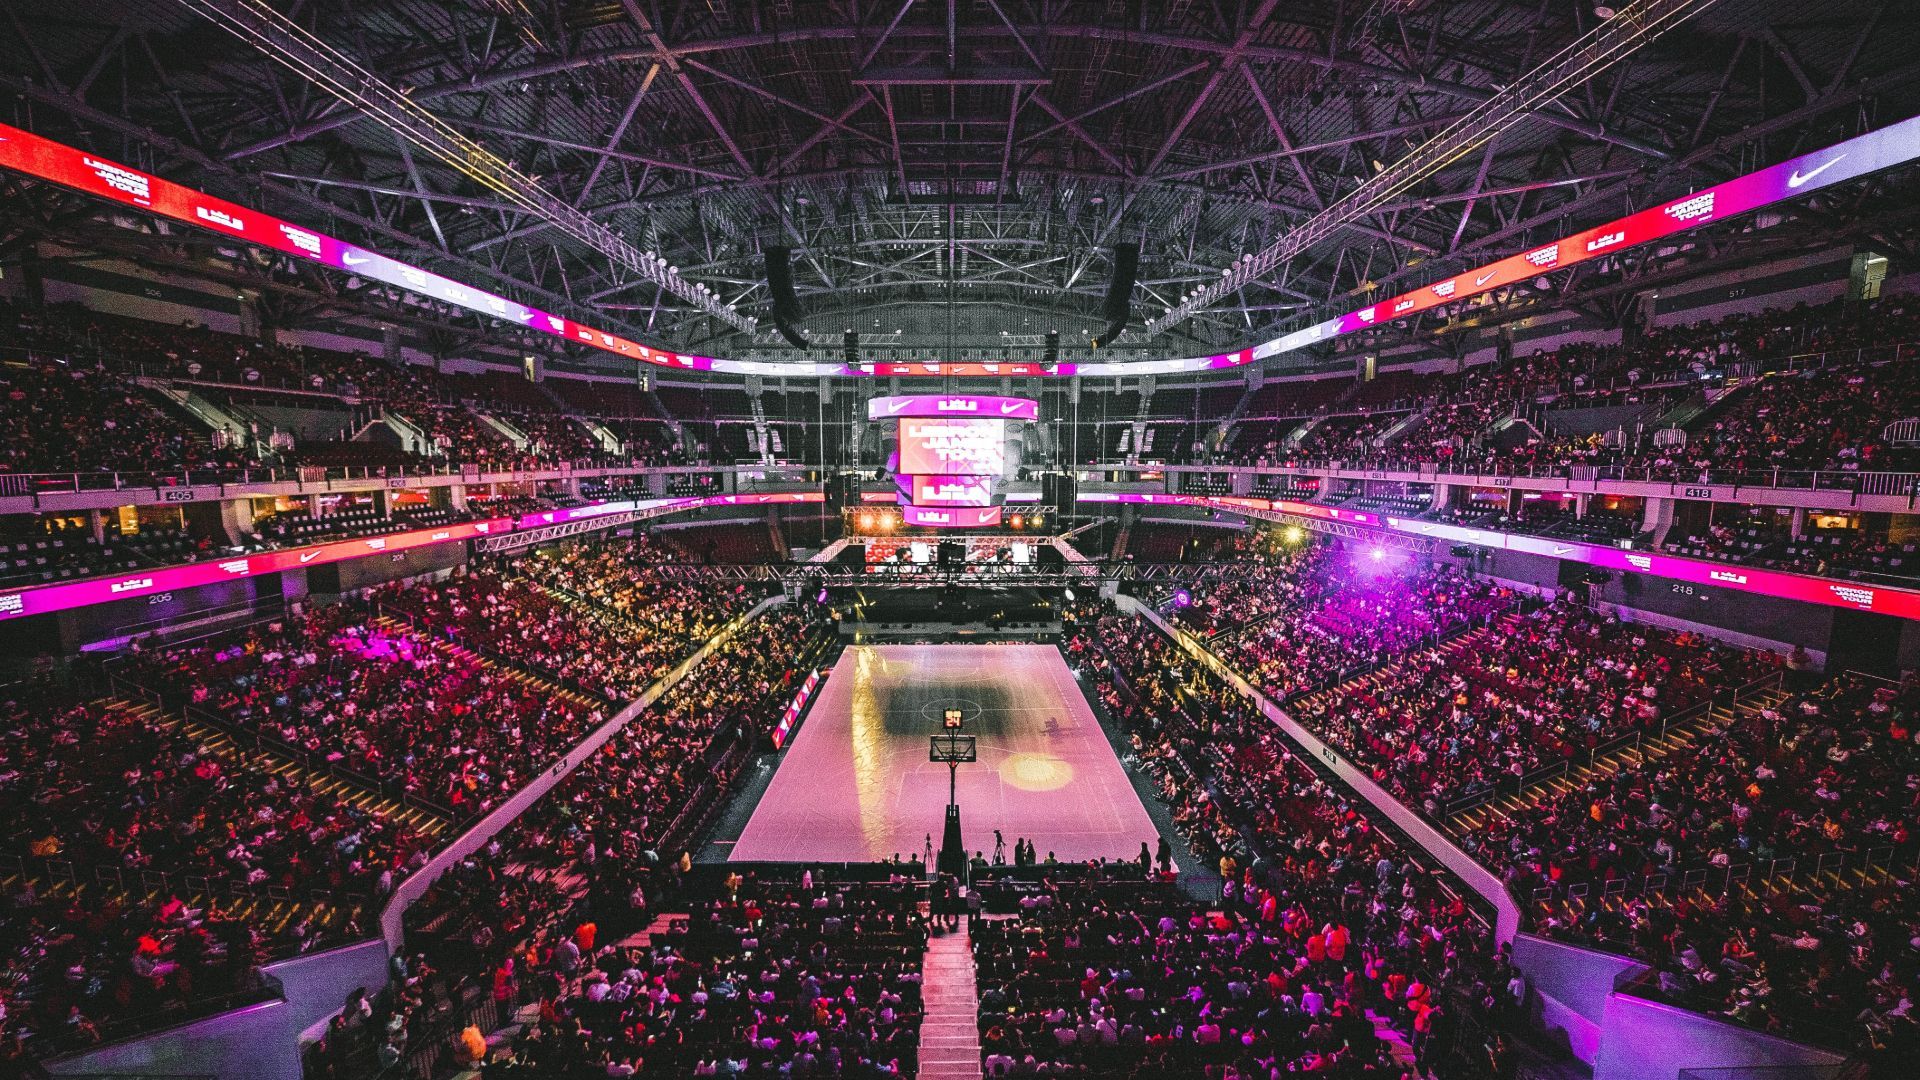 A packed out basketball stadium with purple lighting - NBA